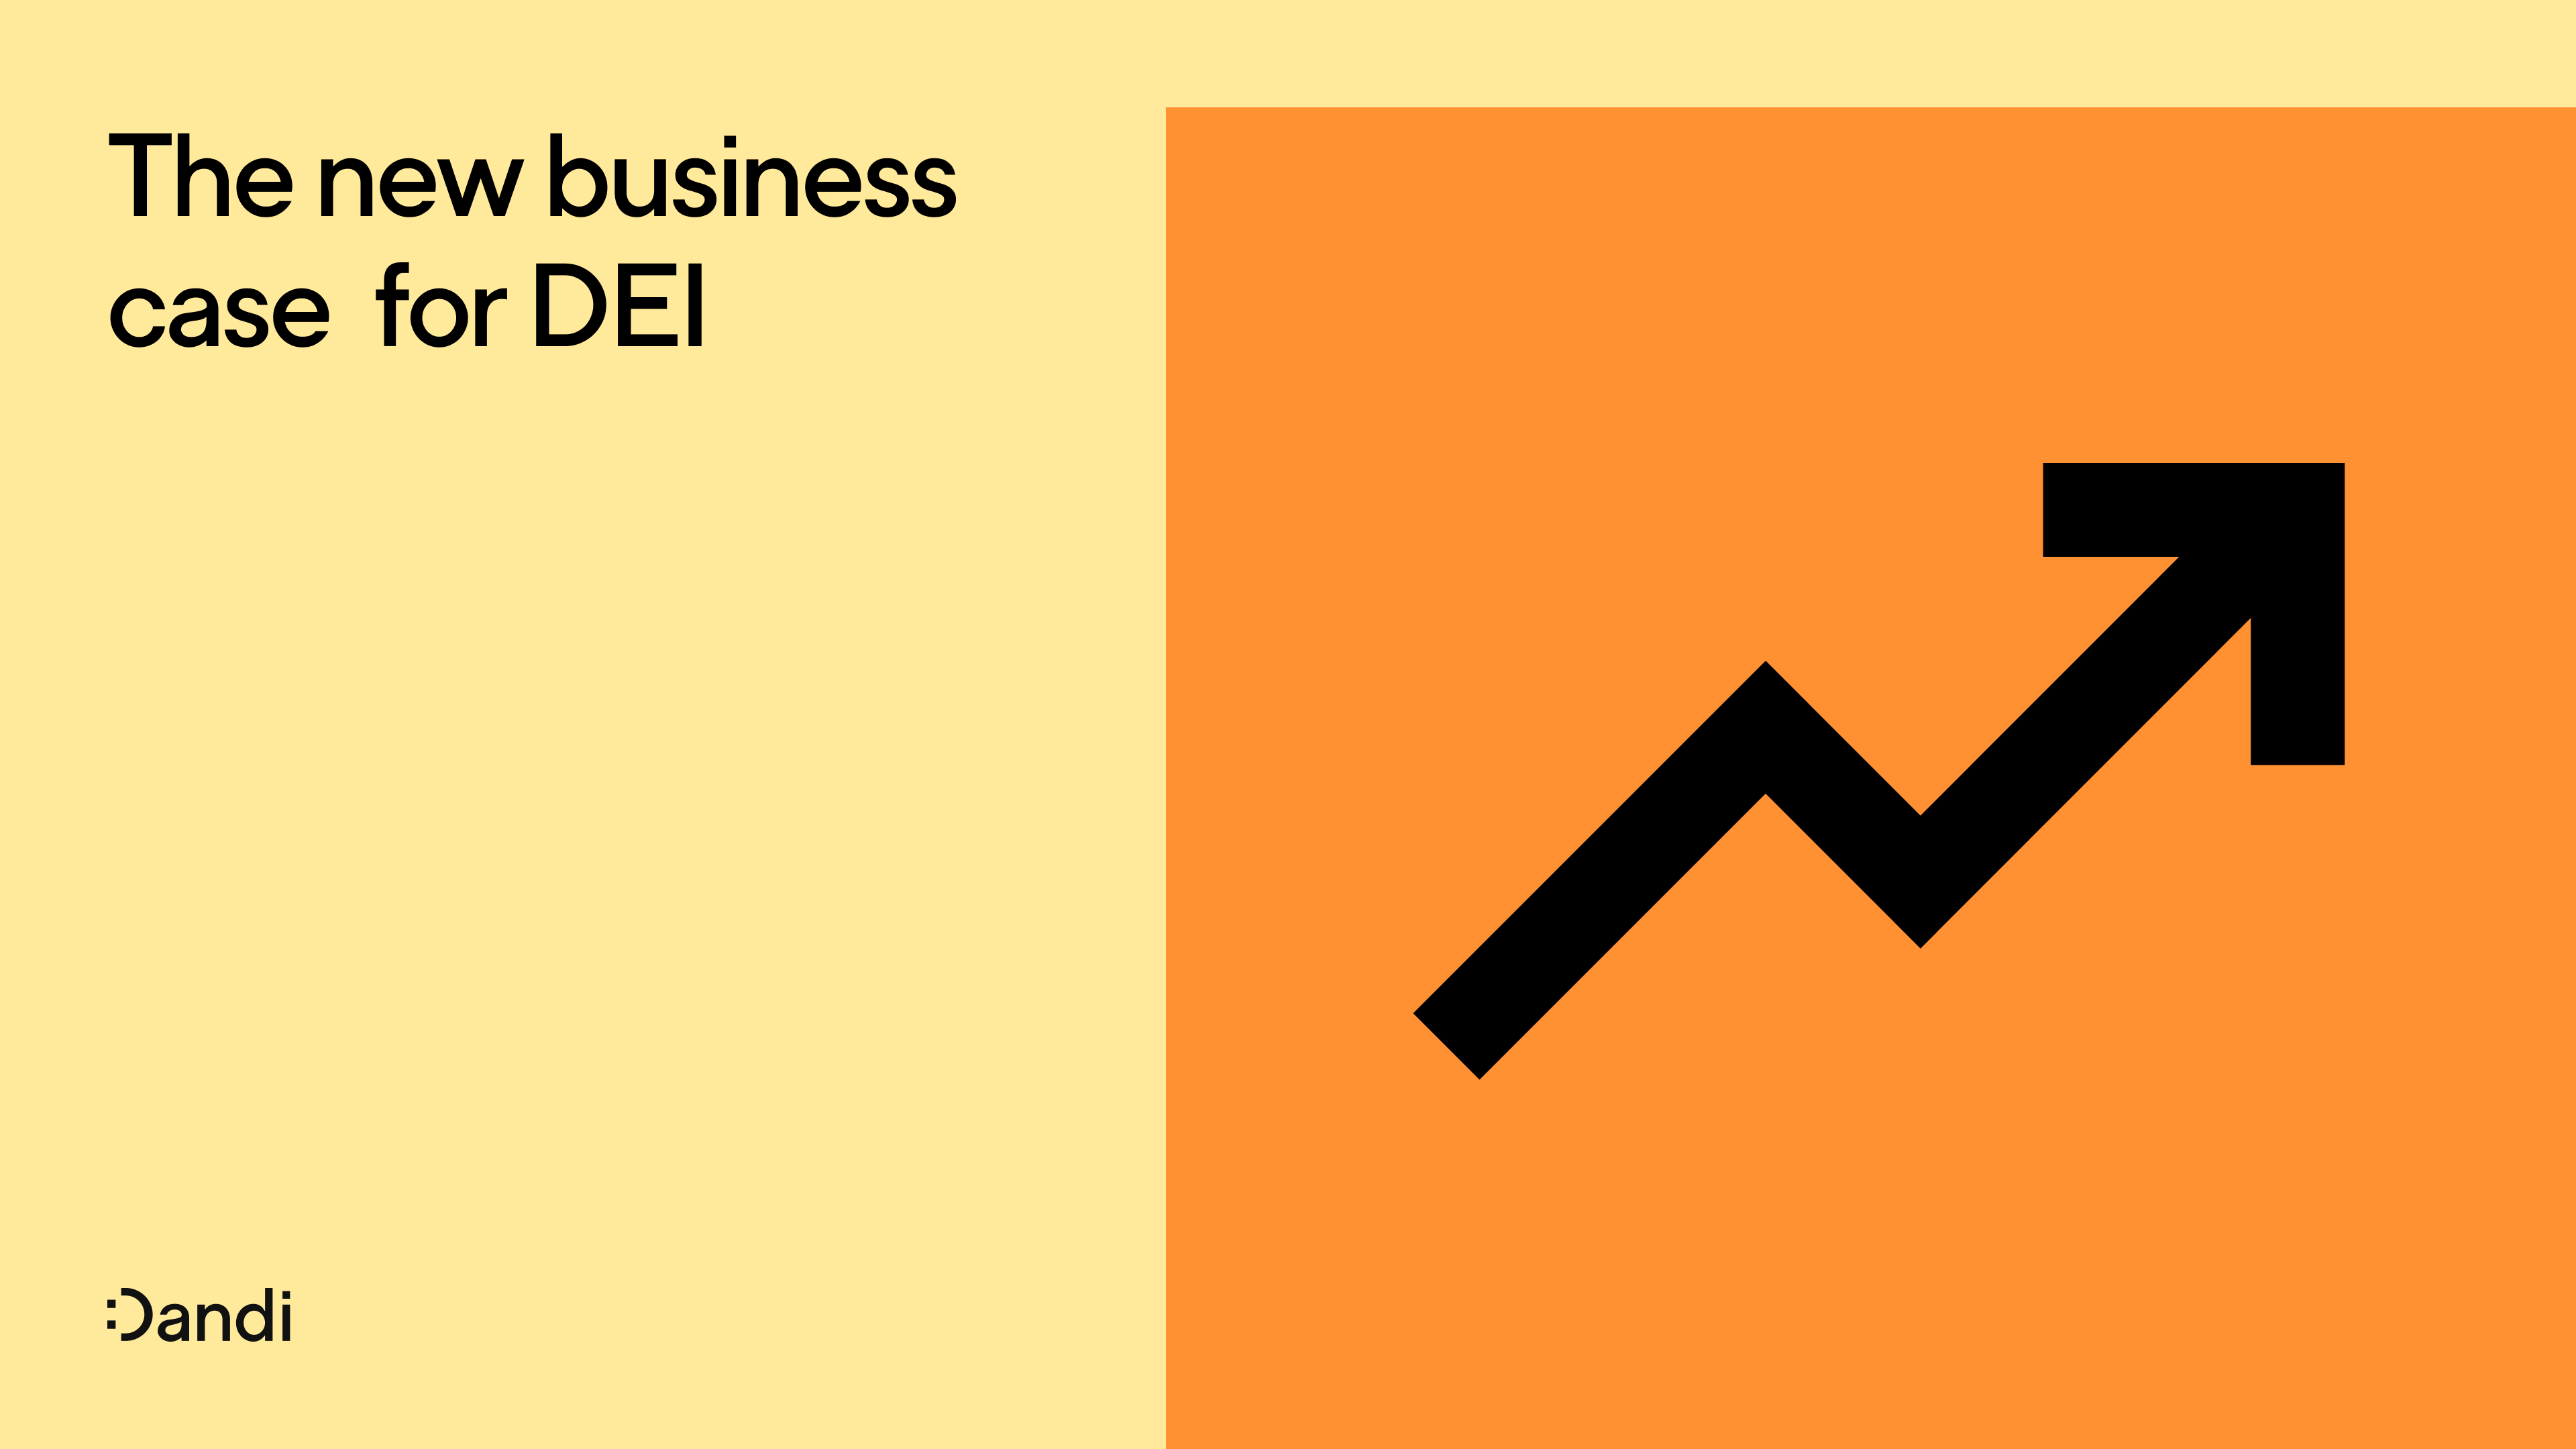 Text reads: The new business case for DEI. To the right is a line graph with an upward trend. The Dandi smiley logo is in the lower left corner.